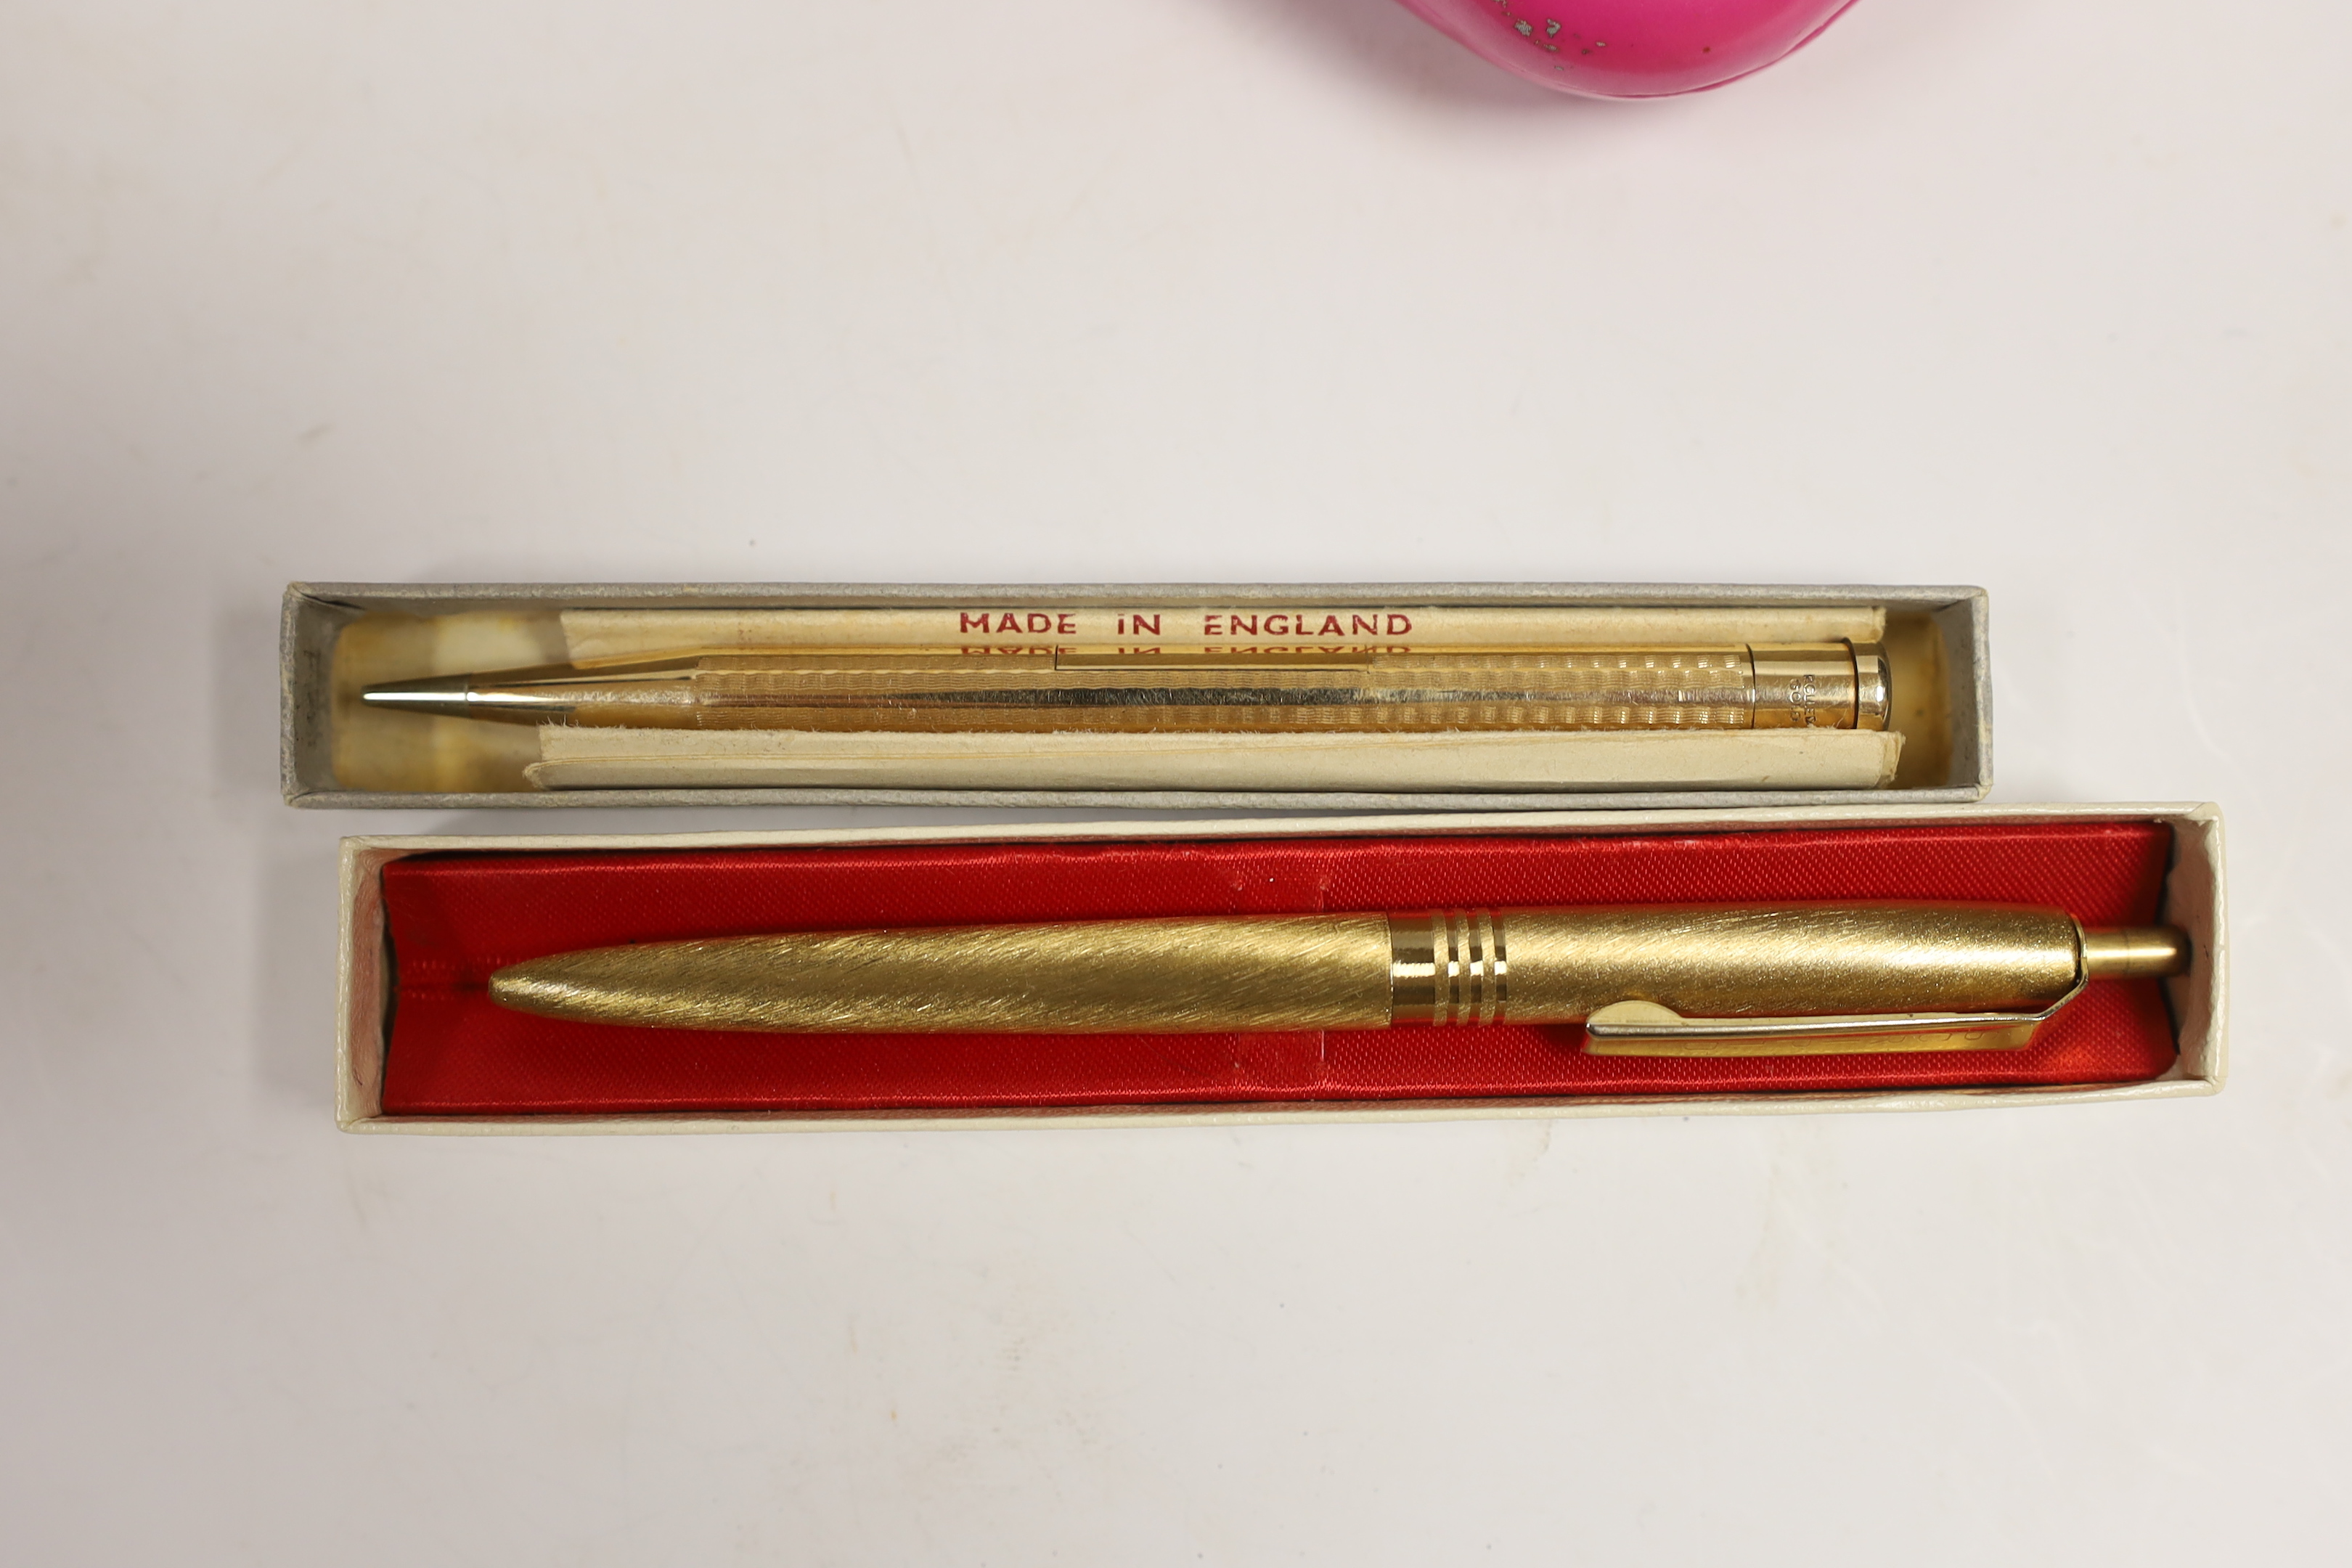 A collection of pens including Parker, some with gold nibs